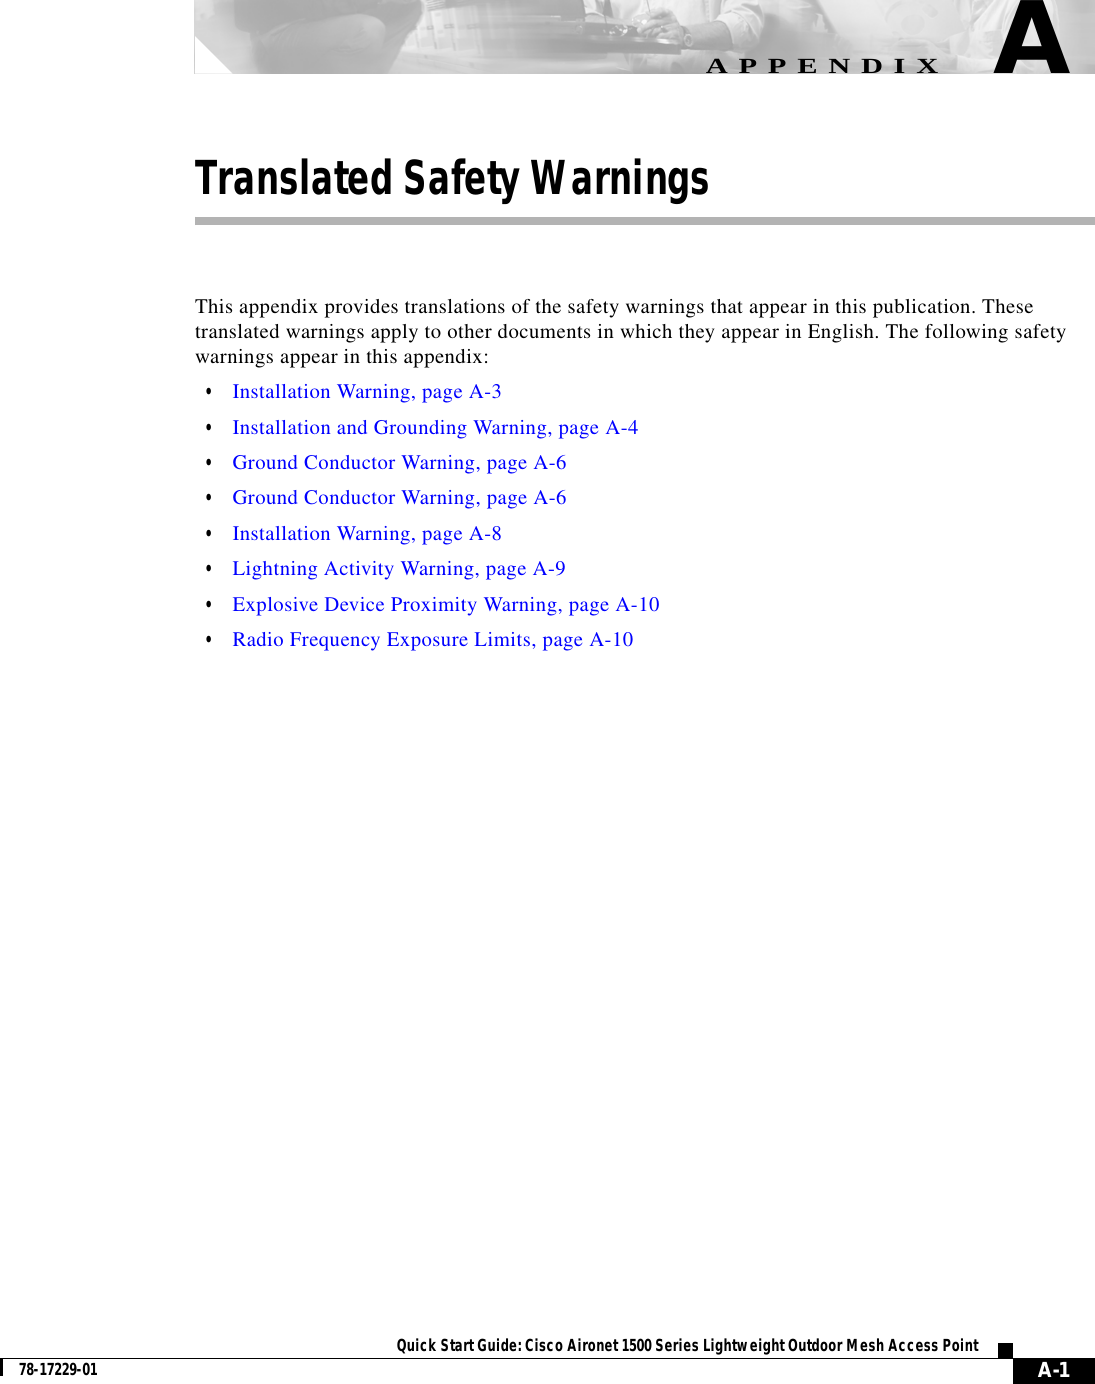  A-1Quick Start Guide: Cisco Aironet 1500 Series Lightweight Outdoor Mesh Access Point78-17229-01APPENDIXATranslated Safety WarningsThis appendix provides translations of the safety warnings that appear in this publication. These translated warnings apply to other documents in which they appear in English. The following safety warnings appear in this appendix:•Installation Warning, page A-3•Installation and Grounding Warning, page A-4•Ground Conductor Warning, page A-6•Ground Conductor Warning, page A-6•Installation Warning, page A-8•Lightning Activity Warning, page A-9•Explosive Device Proximity Warning, page A-10•Radio Frequency Exposure Limits, page A-10